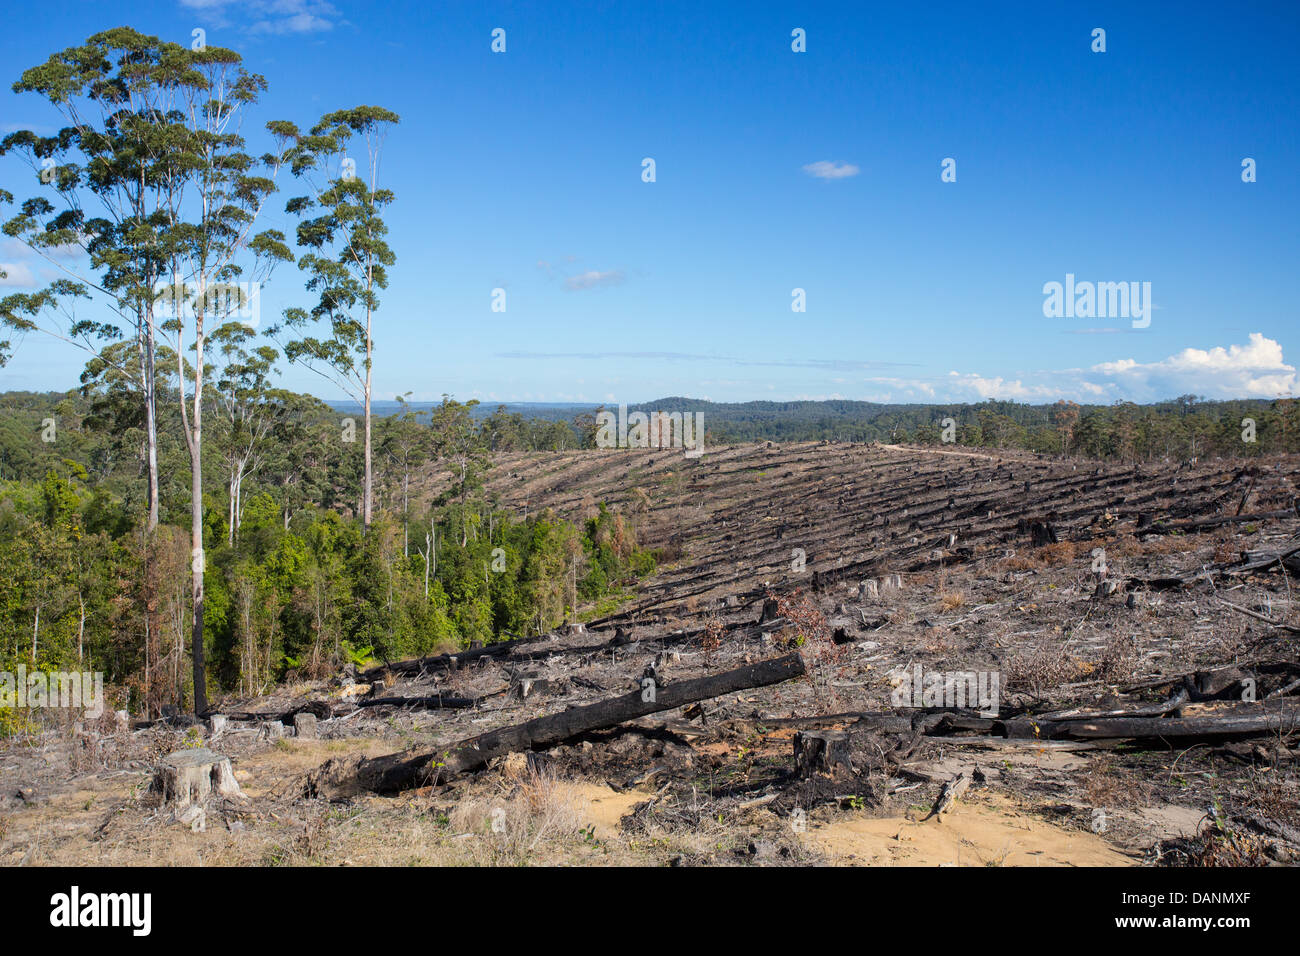 View of deforested hills in the Watagan State Forest, NSW, Australia Stock Photo